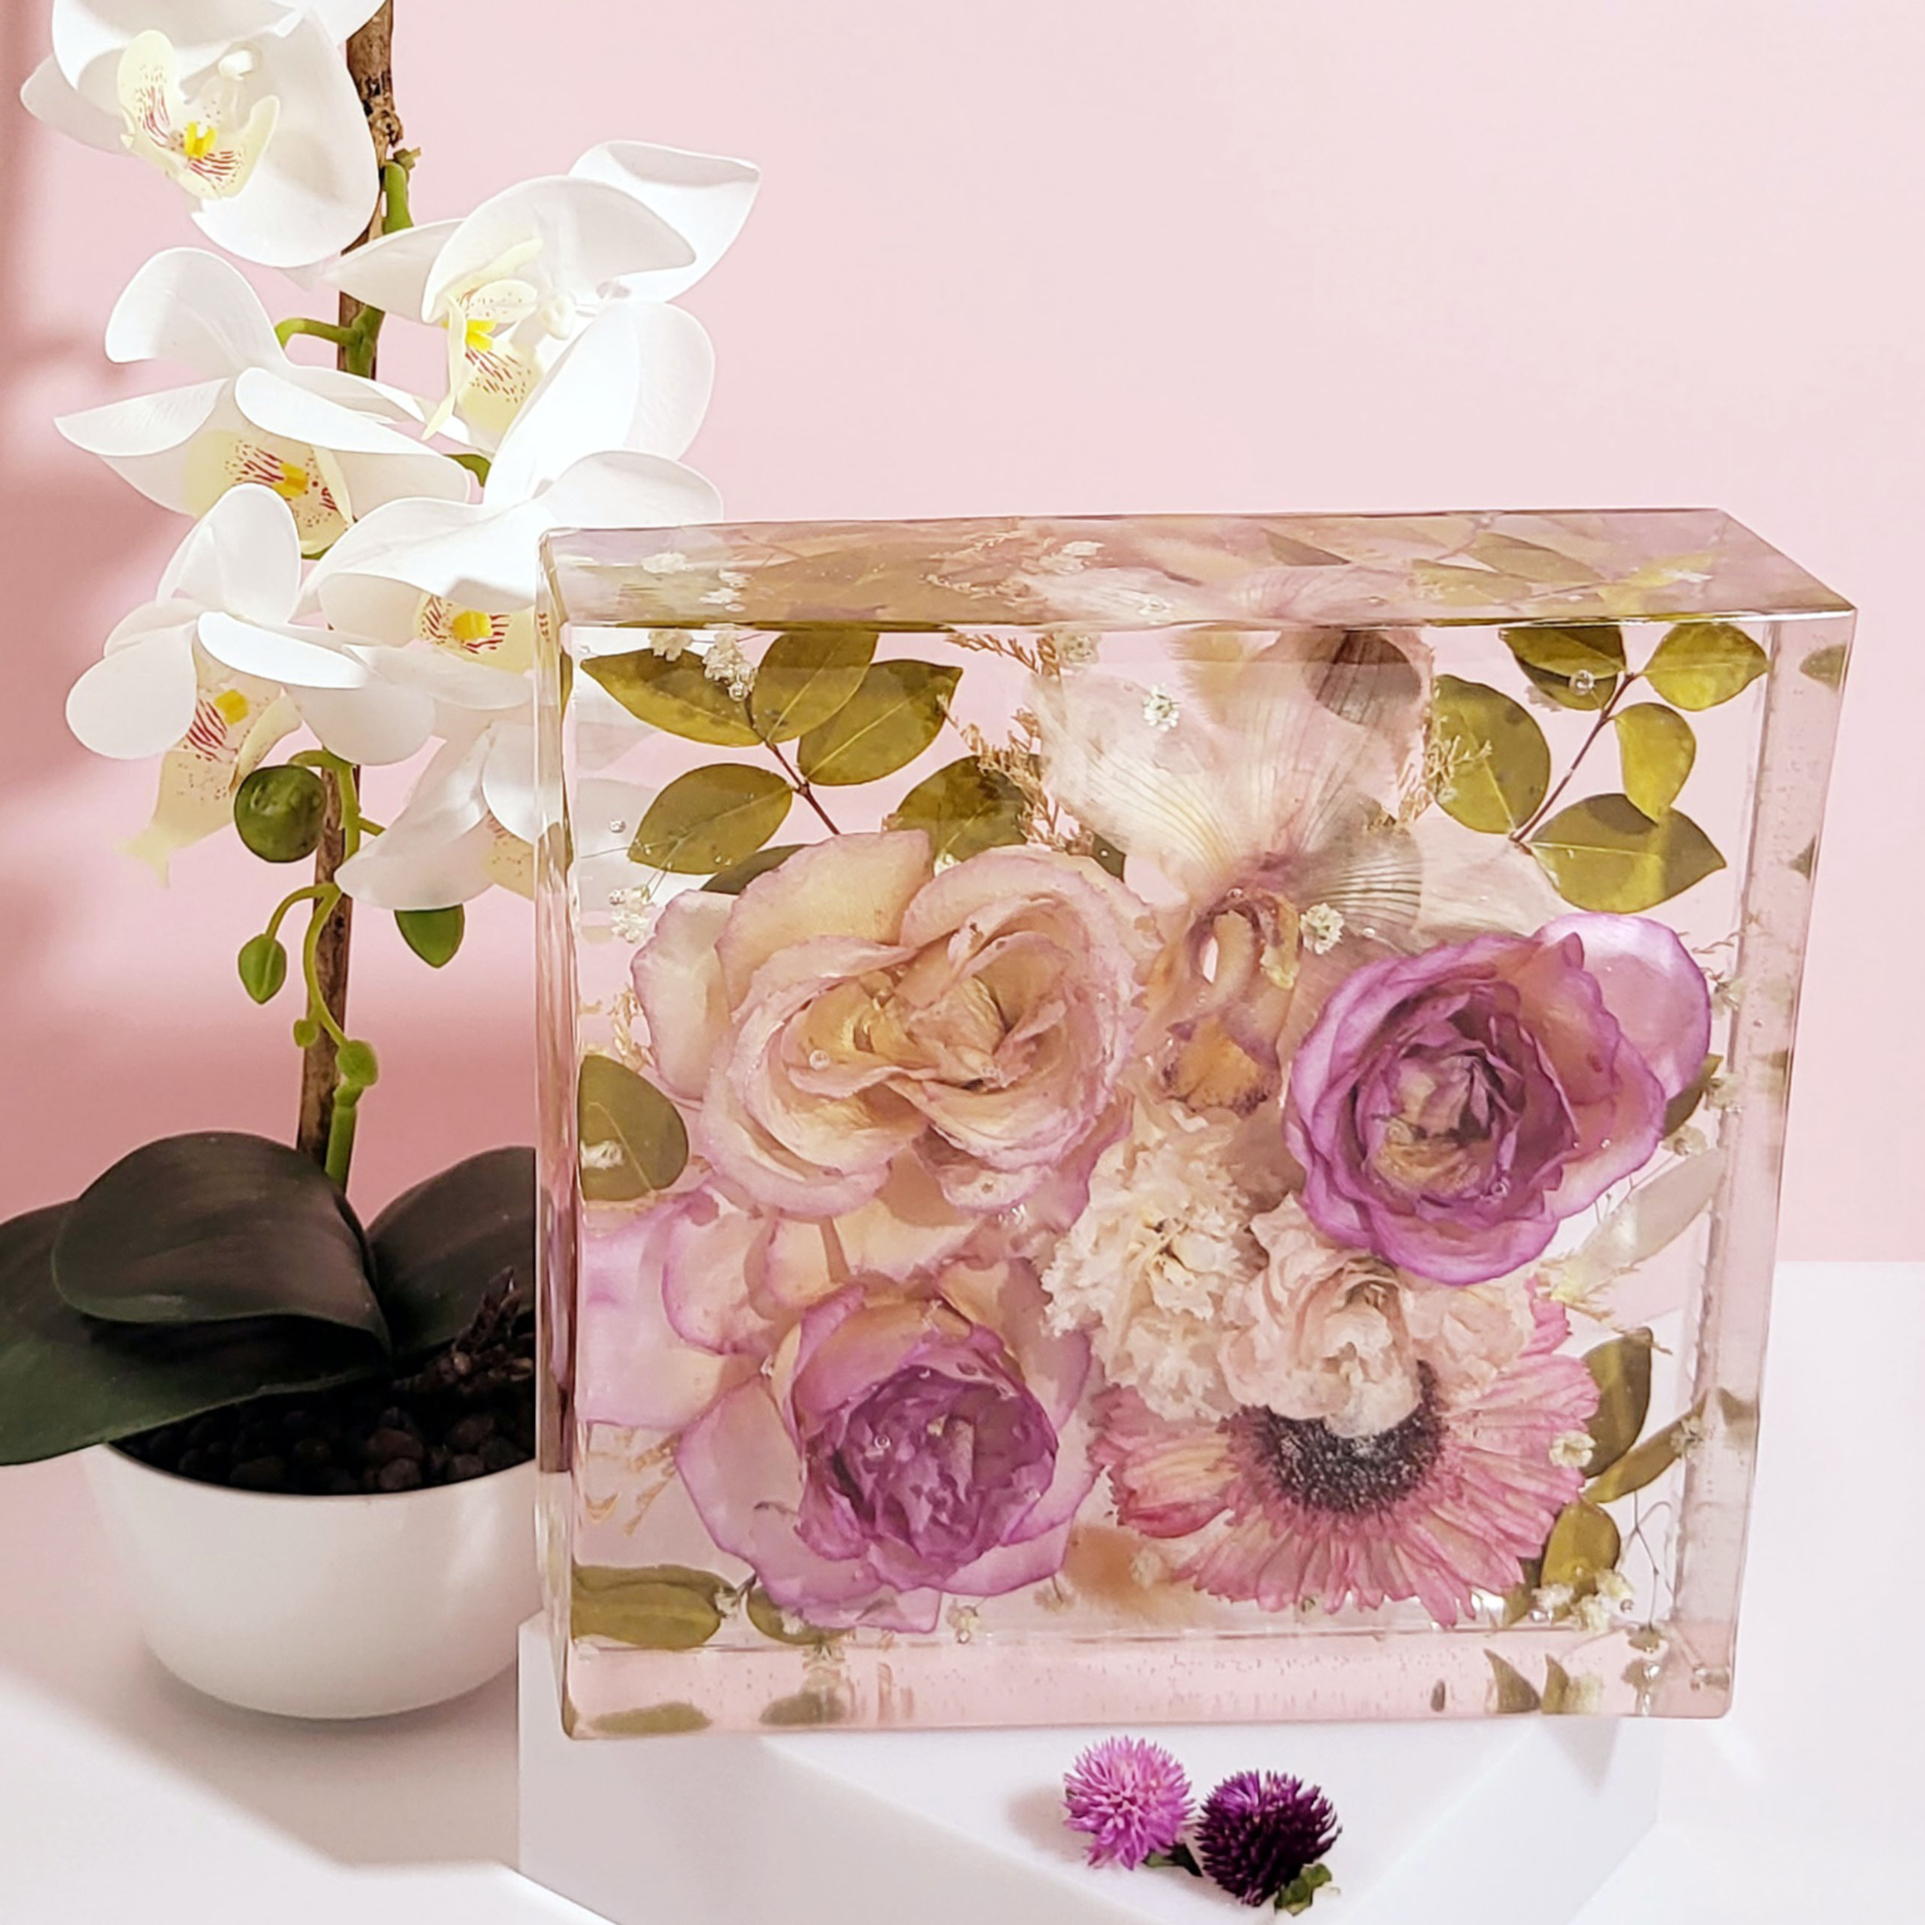 8"x 8" 3D Floral Resin Wedding Bouquet Preservation Modern Fried Flowers Square Save Your Gift Keepsake - flofloflowery